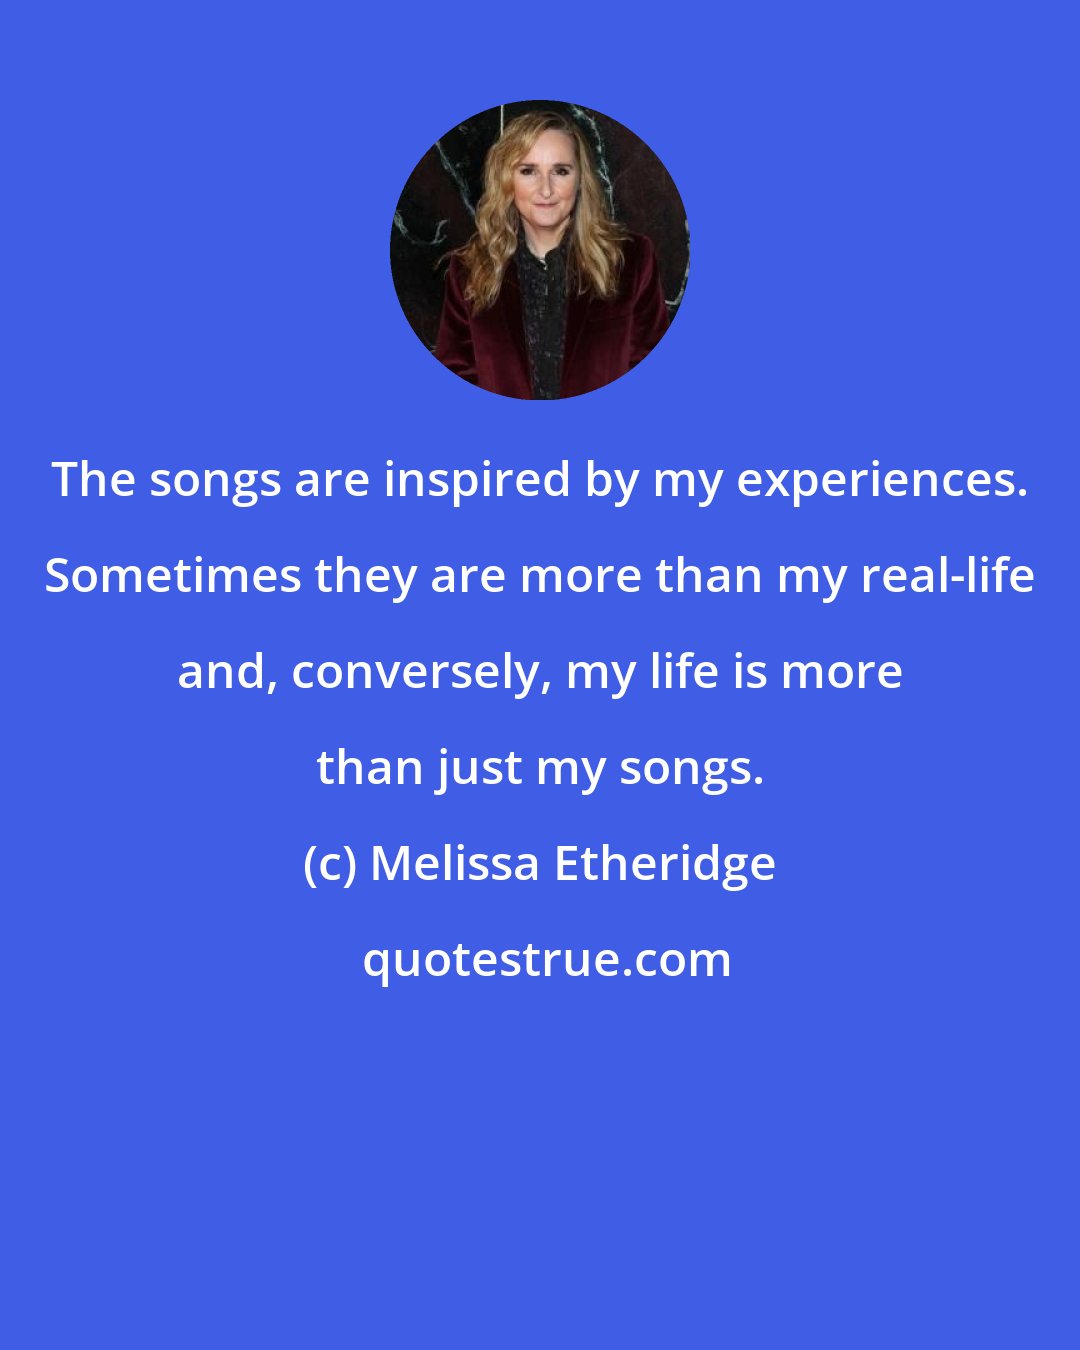 Melissa Etheridge: The songs are inspired by my experiences. Sometimes they are more than my real-life and, conversely, my life is more than just my songs.